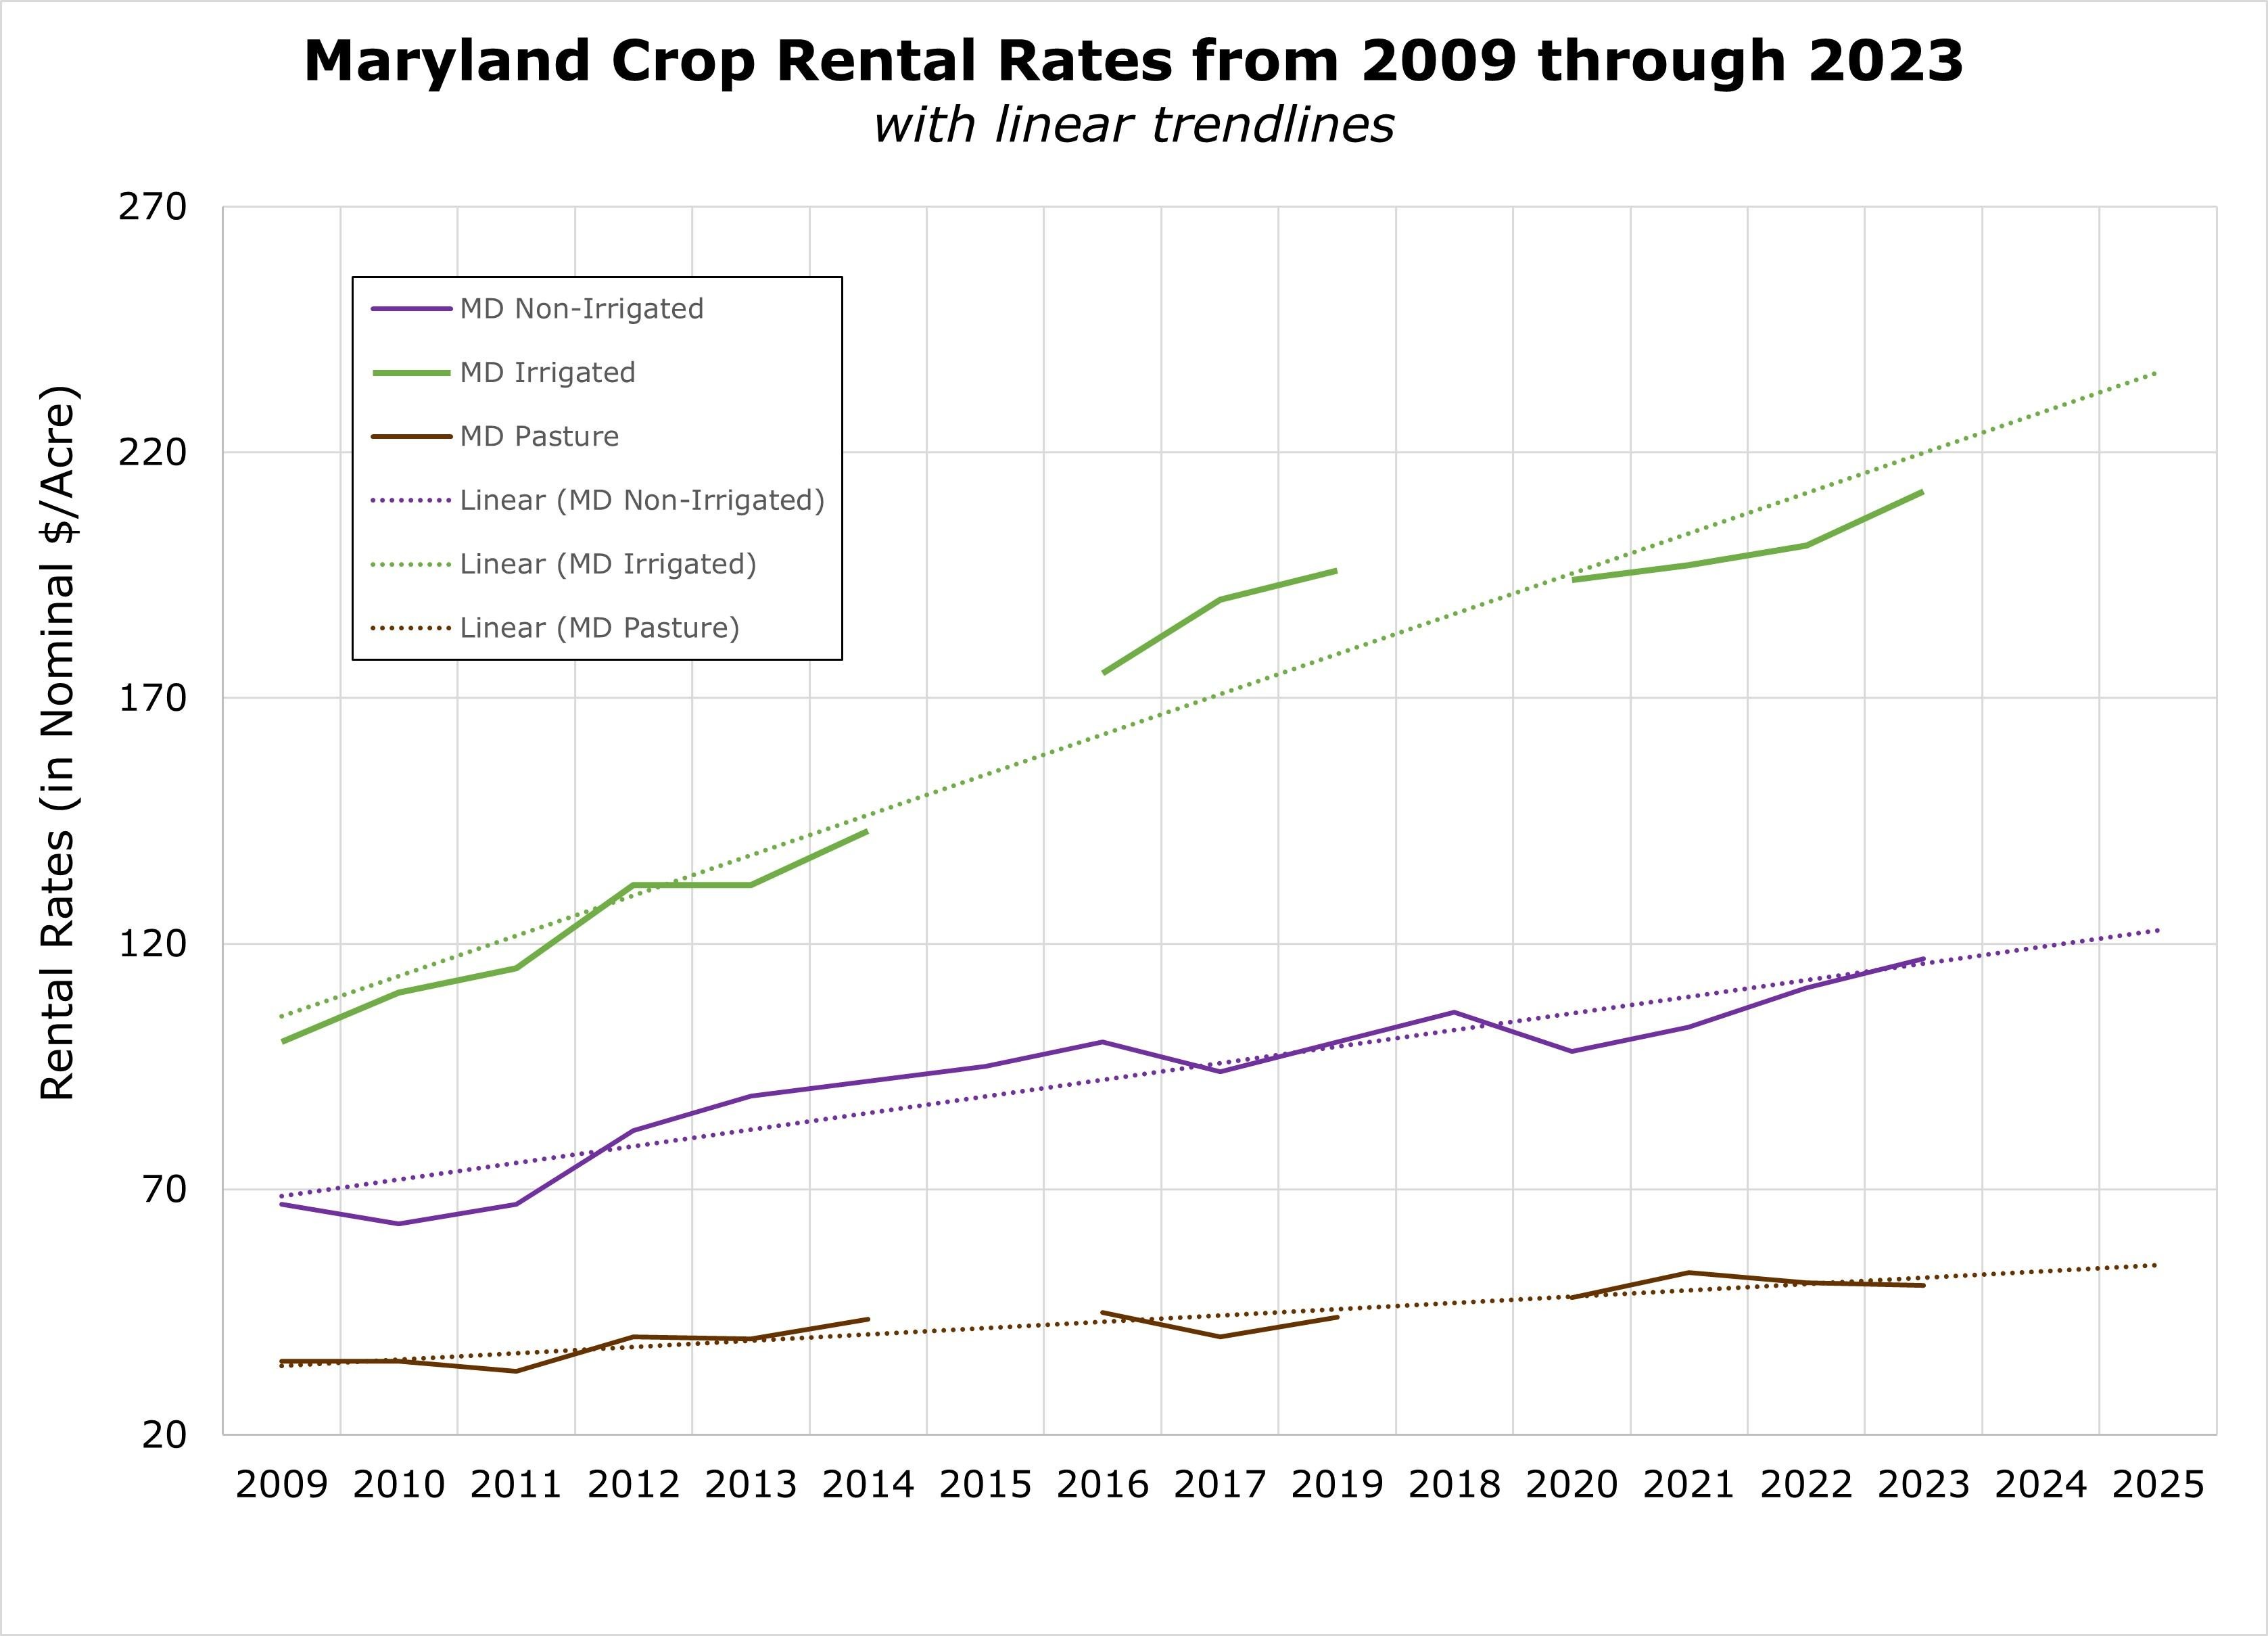 Graph Summary of Crop Rental Rates (avg) from 2009-2022